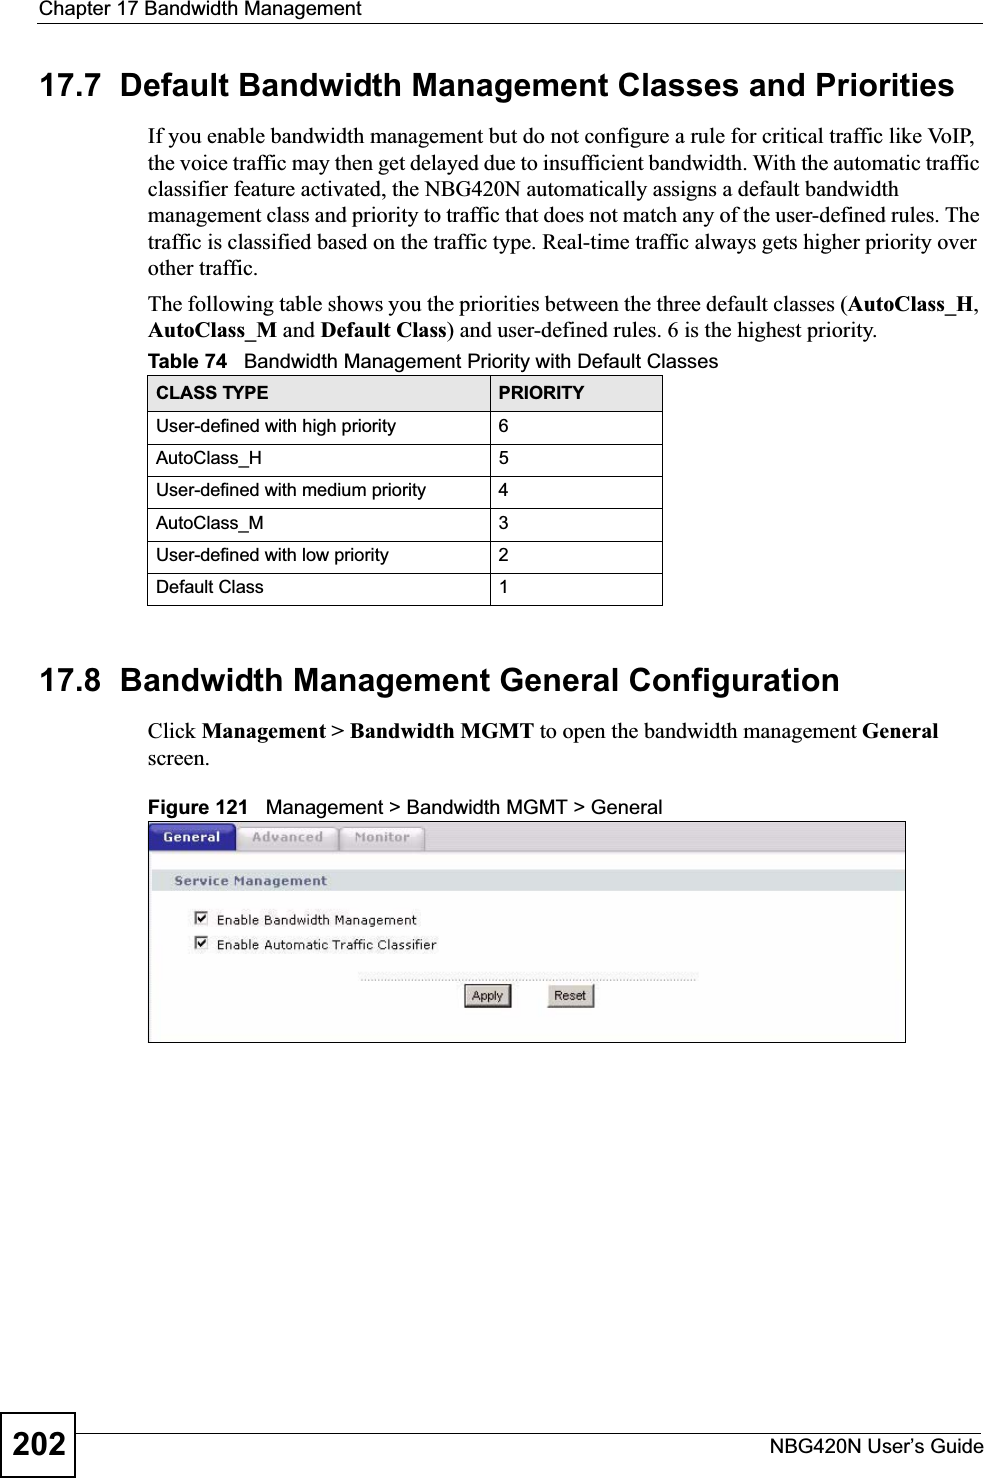 Chapter 17 Bandwidth ManagementNBG420N User’s Guide20217.7  Default Bandwidth Management Classes and PrioritiesIf you enable bandwidth management but do not configure a rule for critical traffic like VoIP, the voice traffic may then get delayed due to insufficient bandwidth. With the automatic traffic classifier feature activated, the NBG420N automatically assigns a default bandwidth management class and priority to traffic that does not match any of the user-defined rules. The traffic is classified based on the traffic type. Real-time traffic always gets higher priority over other traffic. The following table shows you the priorities between the three default classes (AutoClass_H,AutoClass_M and Default Class) and user-defined rules. 6 is the highest priority.17.8  Bandwidth Management General Configuration Click Management &gt; Bandwidth MGMT to open the bandwidth management Generalscreen.Figure 121   Management &gt; Bandwidth MGMT &gt; General   Table 74   Bandwidth Management Priority with Default ClassesCLASS TYPE PRIORITYUser-defined with high priority 6AutoClass_H 5User-defined with medium priority 4AutoClass_M 3User-defined with low priority 2Default Class 1